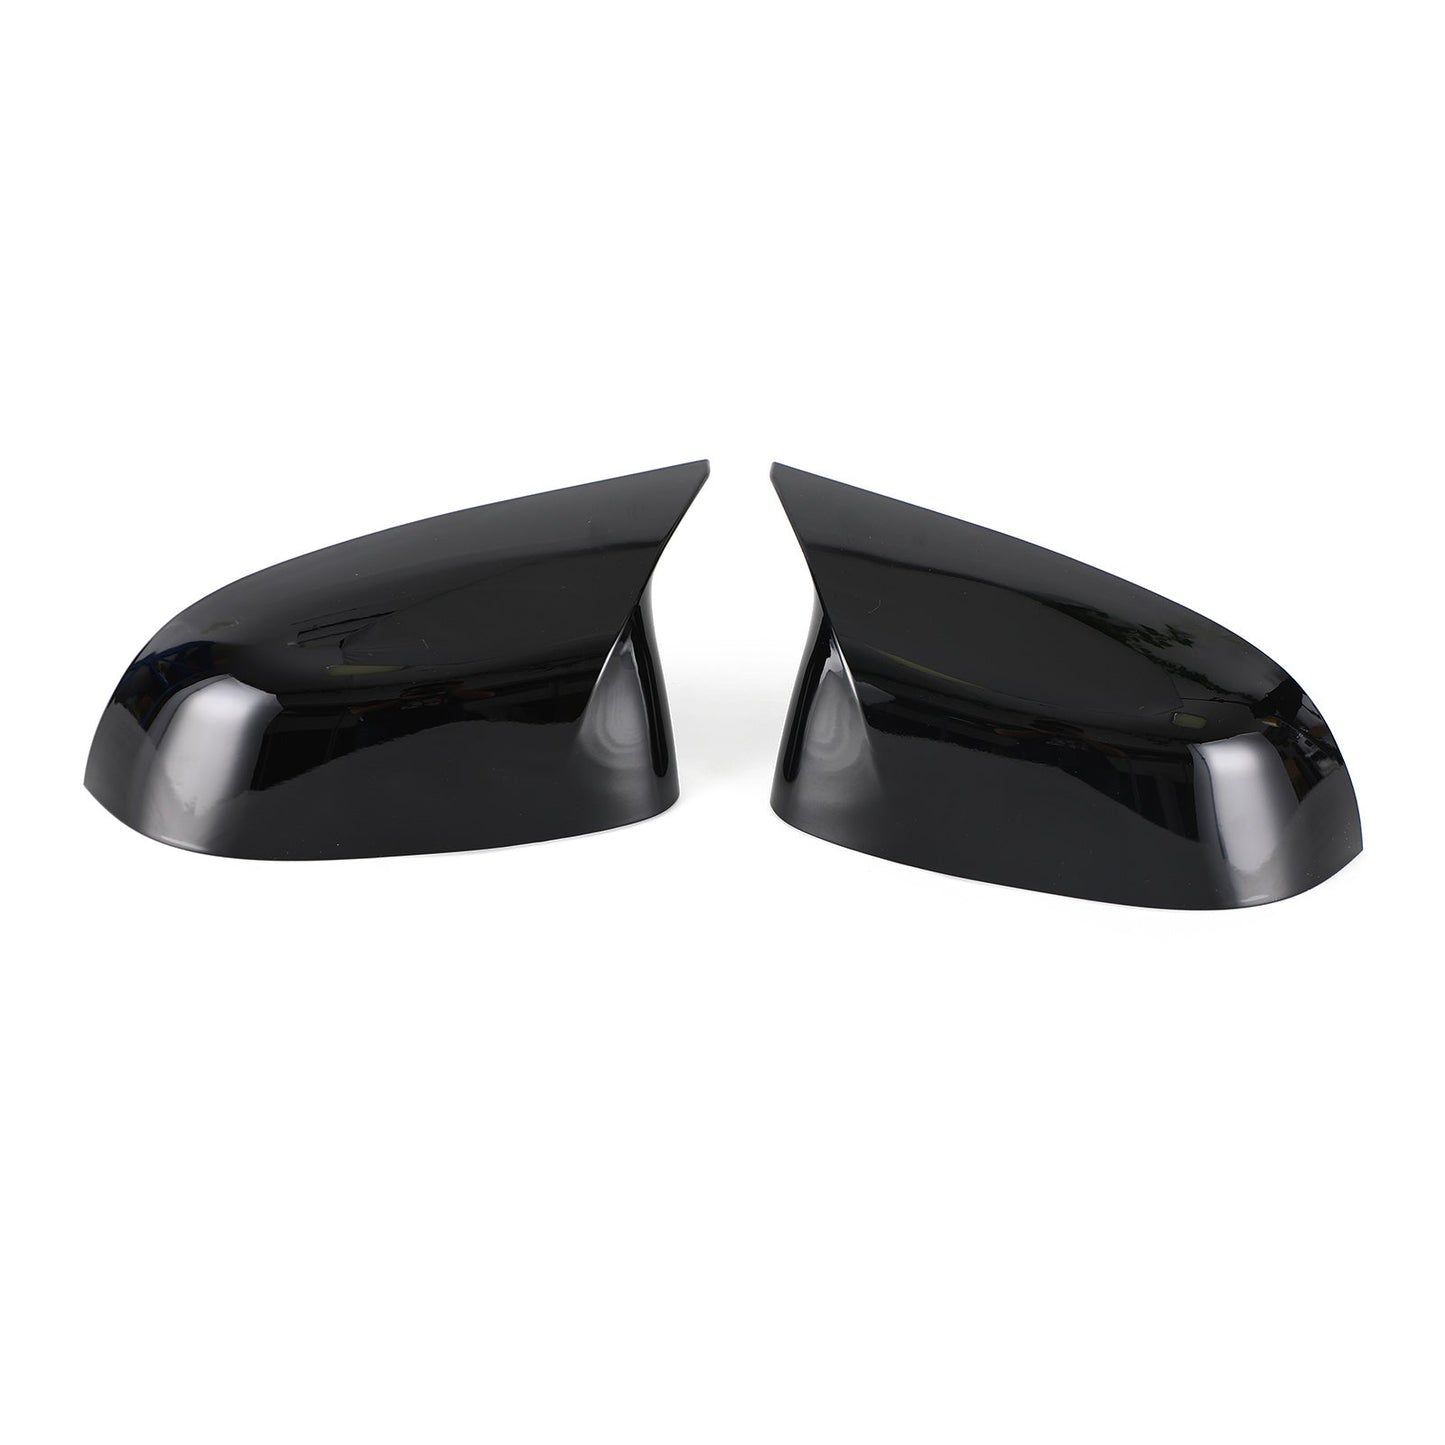 2x Carbon Rear View Side Mirror Cover Caps For BMW X3 X4 X5 X6 G01 G02 G05 G06